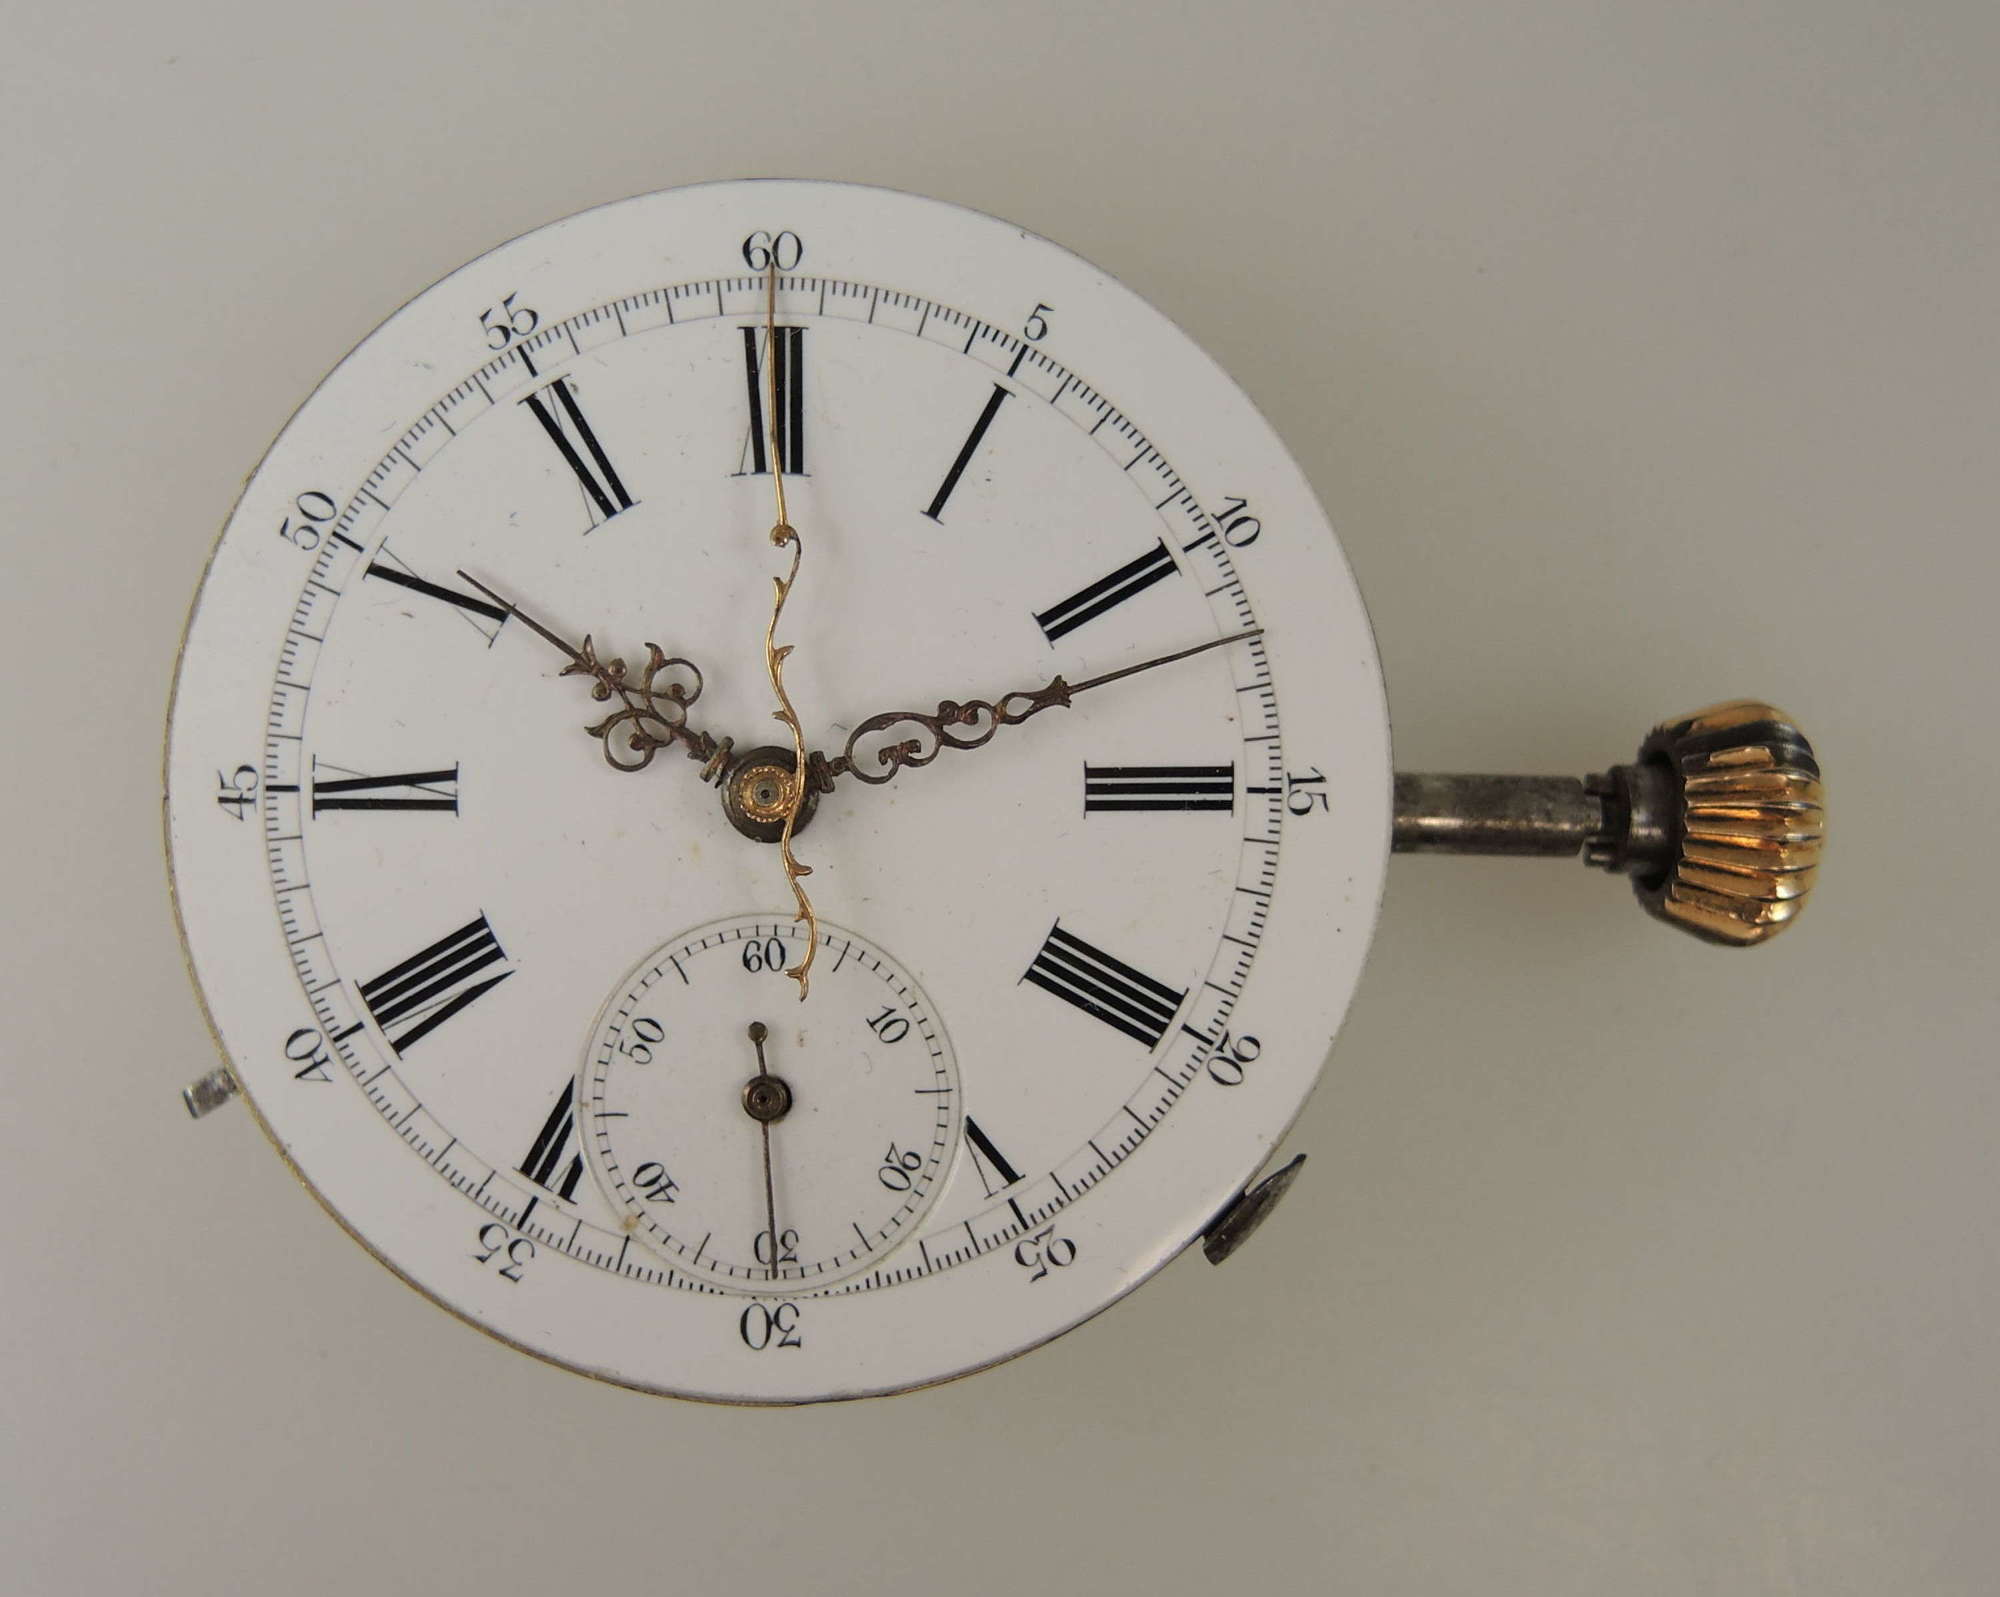 Good Swiss Repeater chronograph movement. With hands c1900